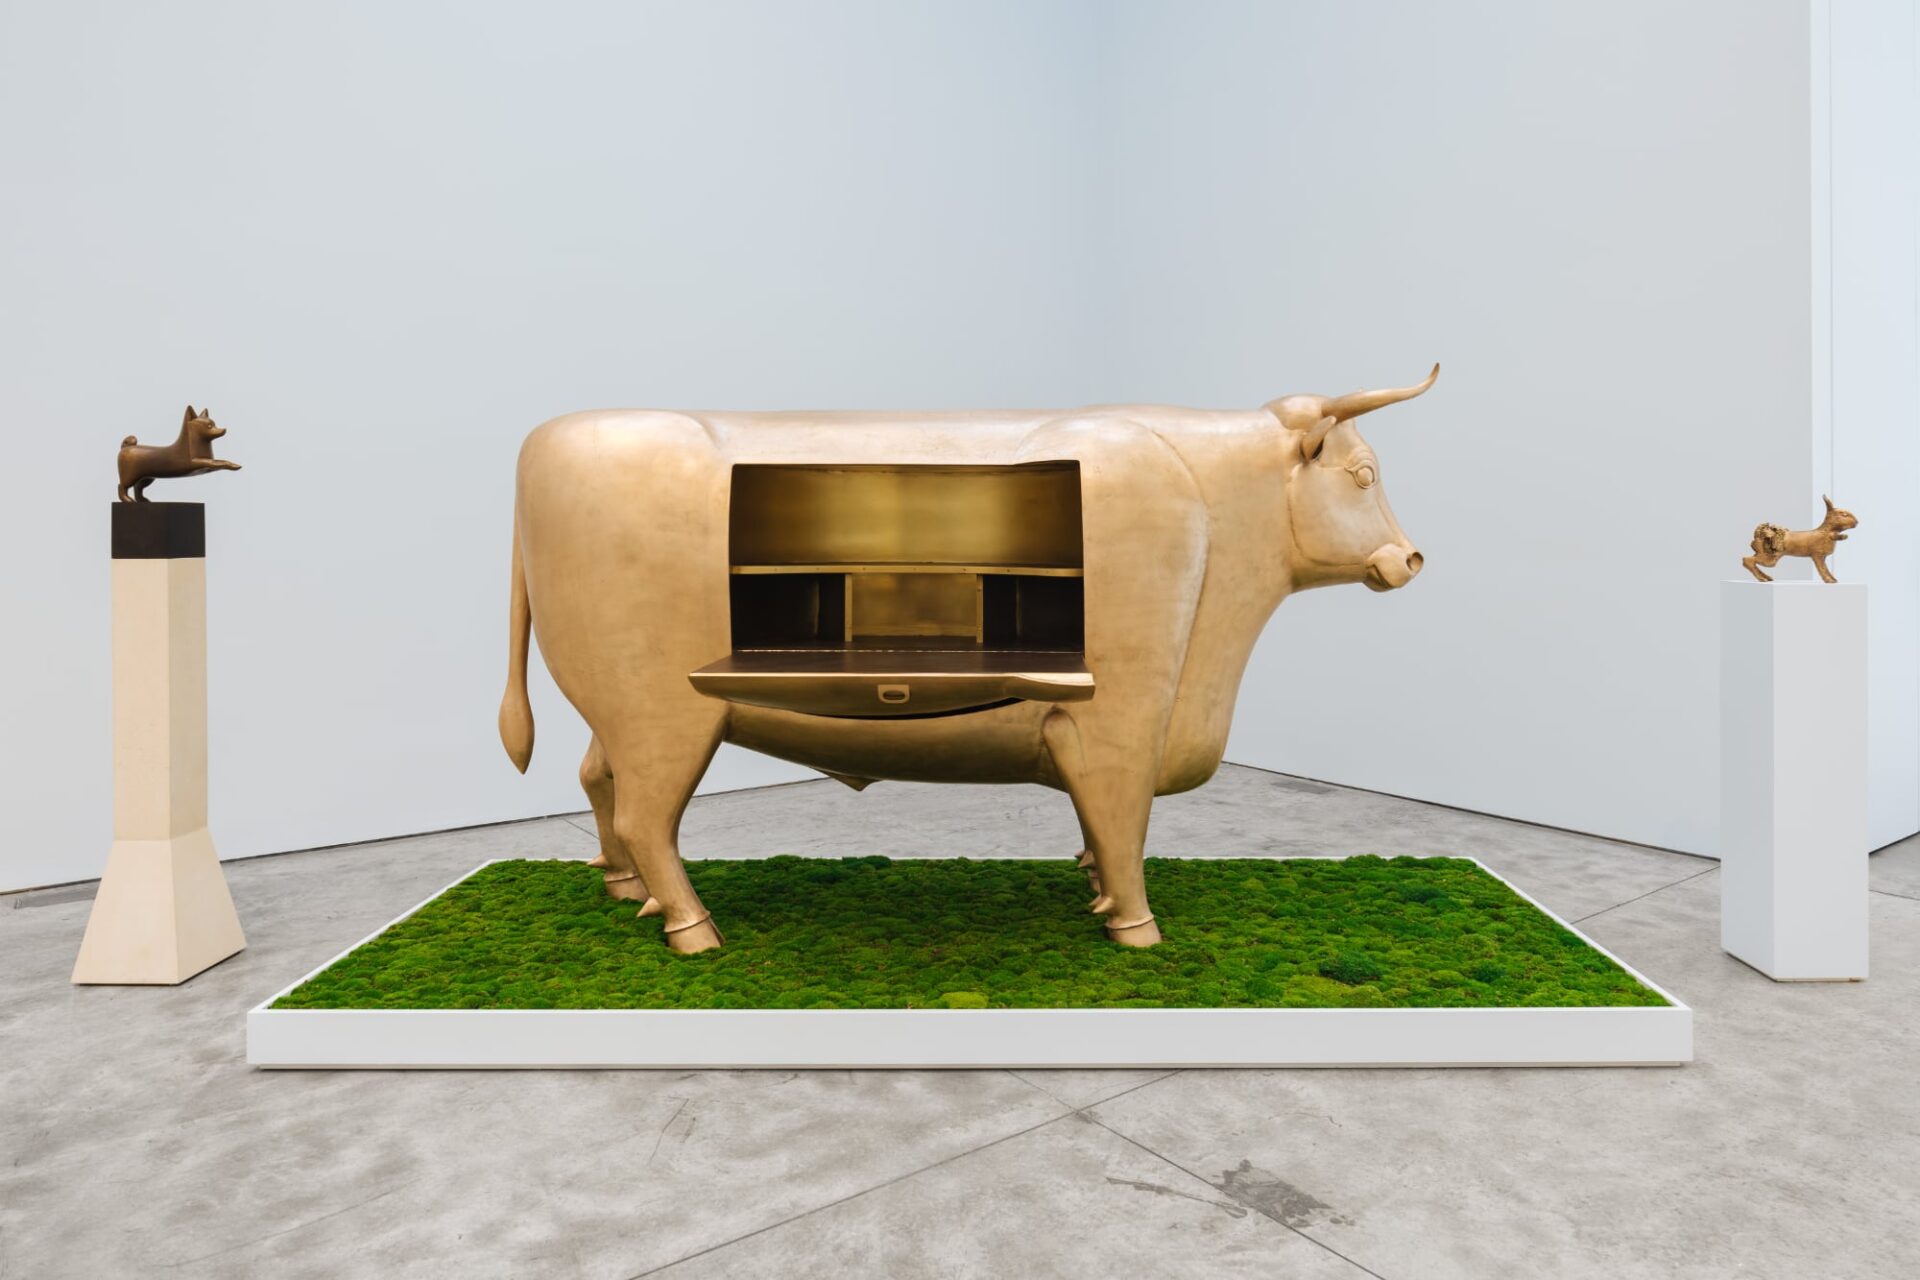 a cow sculpture that opens up like a desk with two small animal sculptures on pedestals on either side